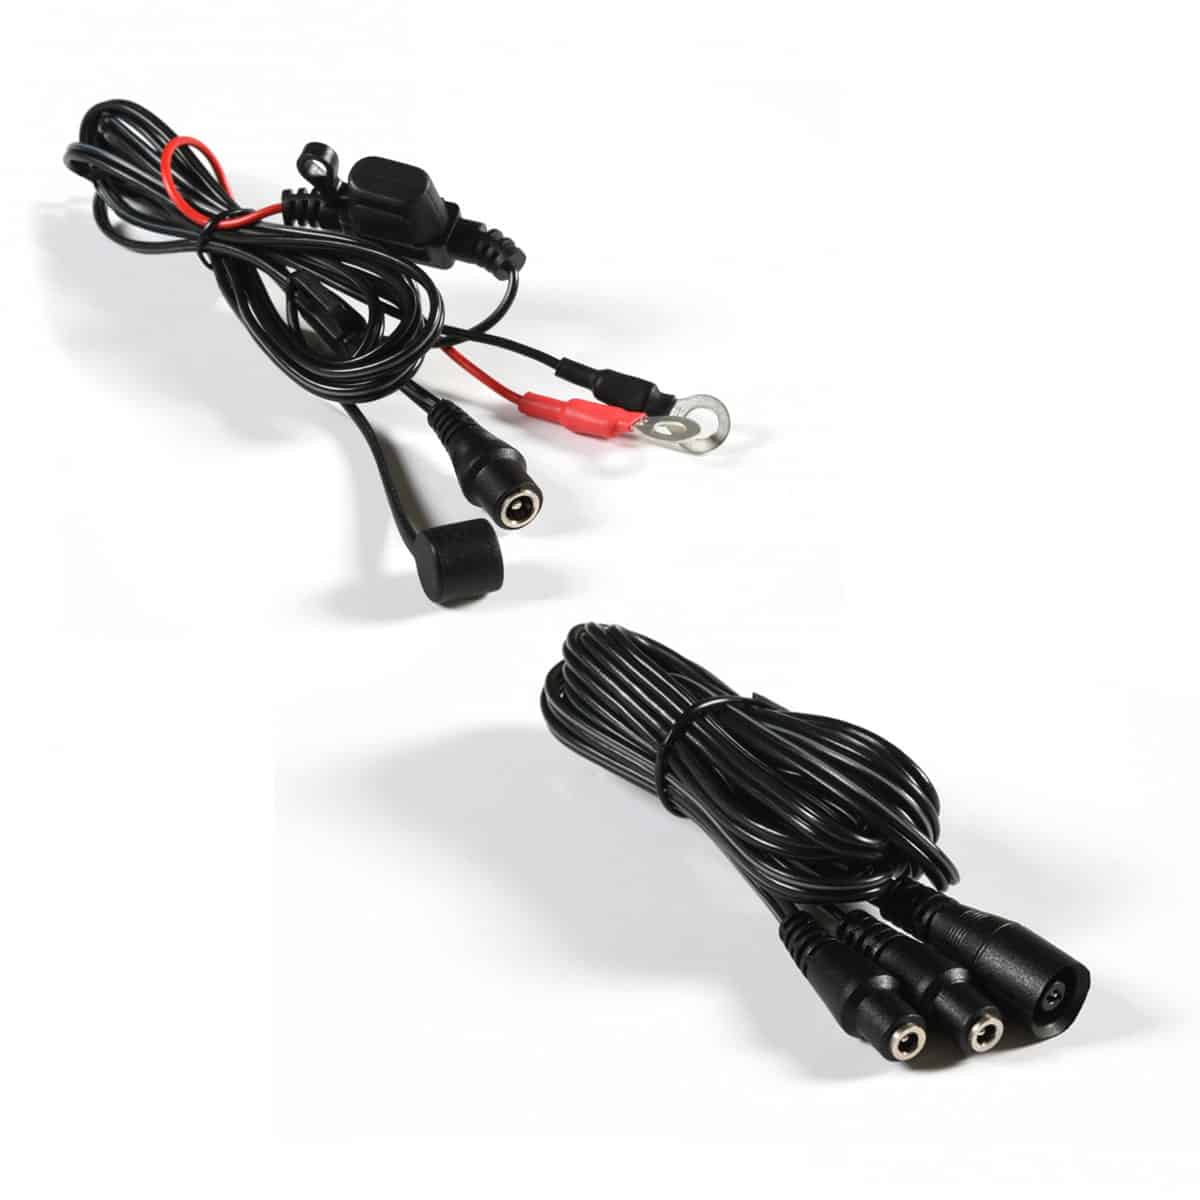 Macna Battery Connection Bundle: The wires required to connect your Macna heated gloves to your motorcycle battery